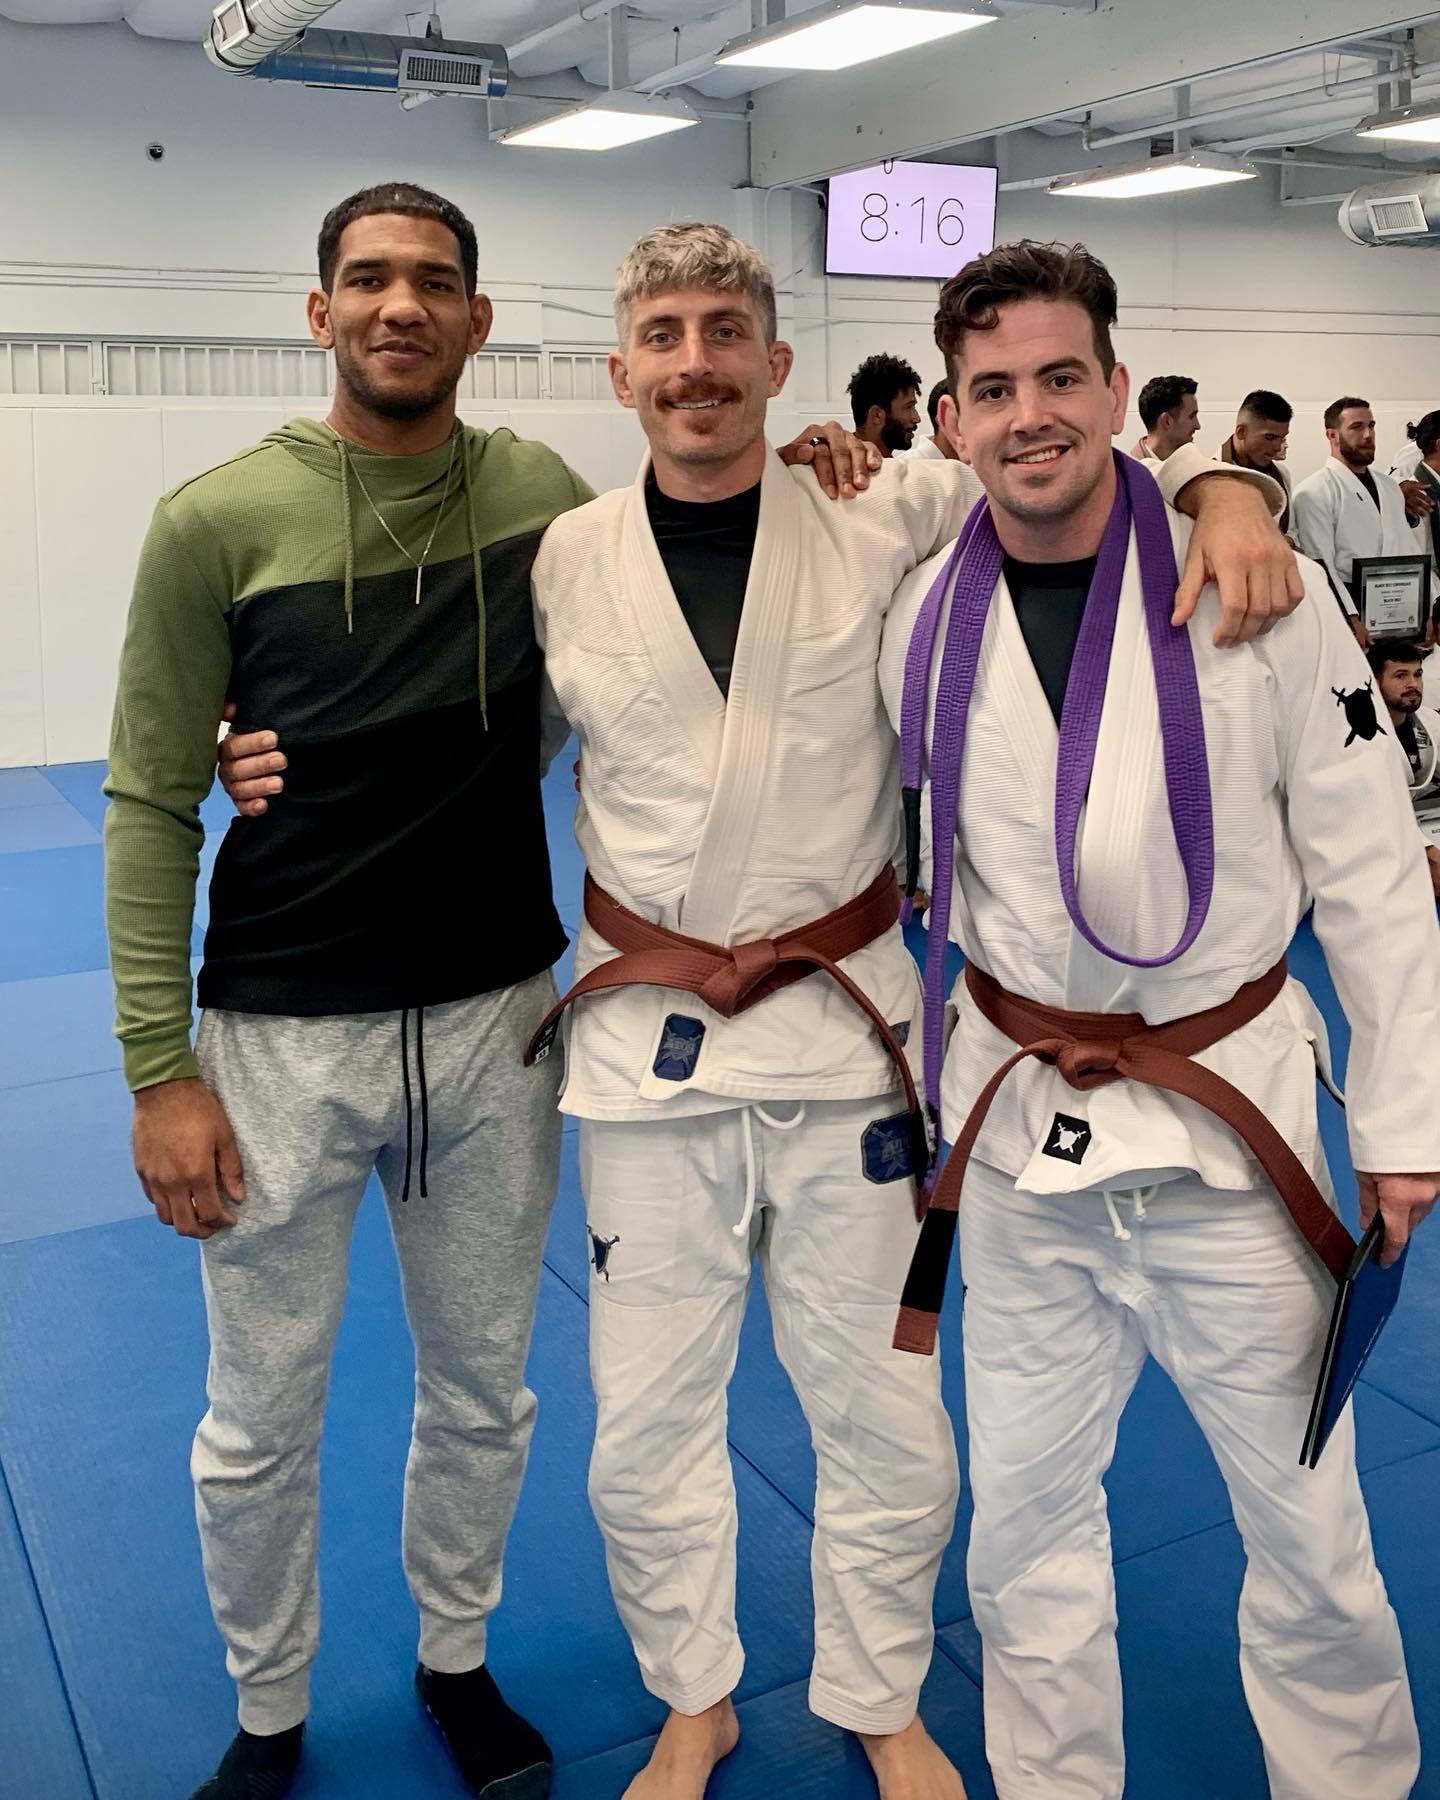 I earned my brown belt in BJJ from the prestigious @atosjiujitsuhq 

Thank you to Professor @galvaobjj for trusting me to represent Atos as a brown belt. It is a great honor to receive this promotion from you. A true legend , the 🐐

Thank you to professors @rolando_samson @jonnatas_gracie @andymurasaki @trovobjj  @dubious_dom & to all the students of the 9am & noon classes. 

Special thanks to my students , coworkers & bosses @oceanpacificgym it’s amazing to be able to coach and share my passion for Jiu jitsu at such an incredible place. 

And thanks to @vincelapelusa, @tommygmcgee for always talking jj with me. 

Thanks to @callieforniagirl999 for believing in me, the support and continued love. 

I am Thankful for my body, the ability to train and learn and grow. Time to begin again. 🤎